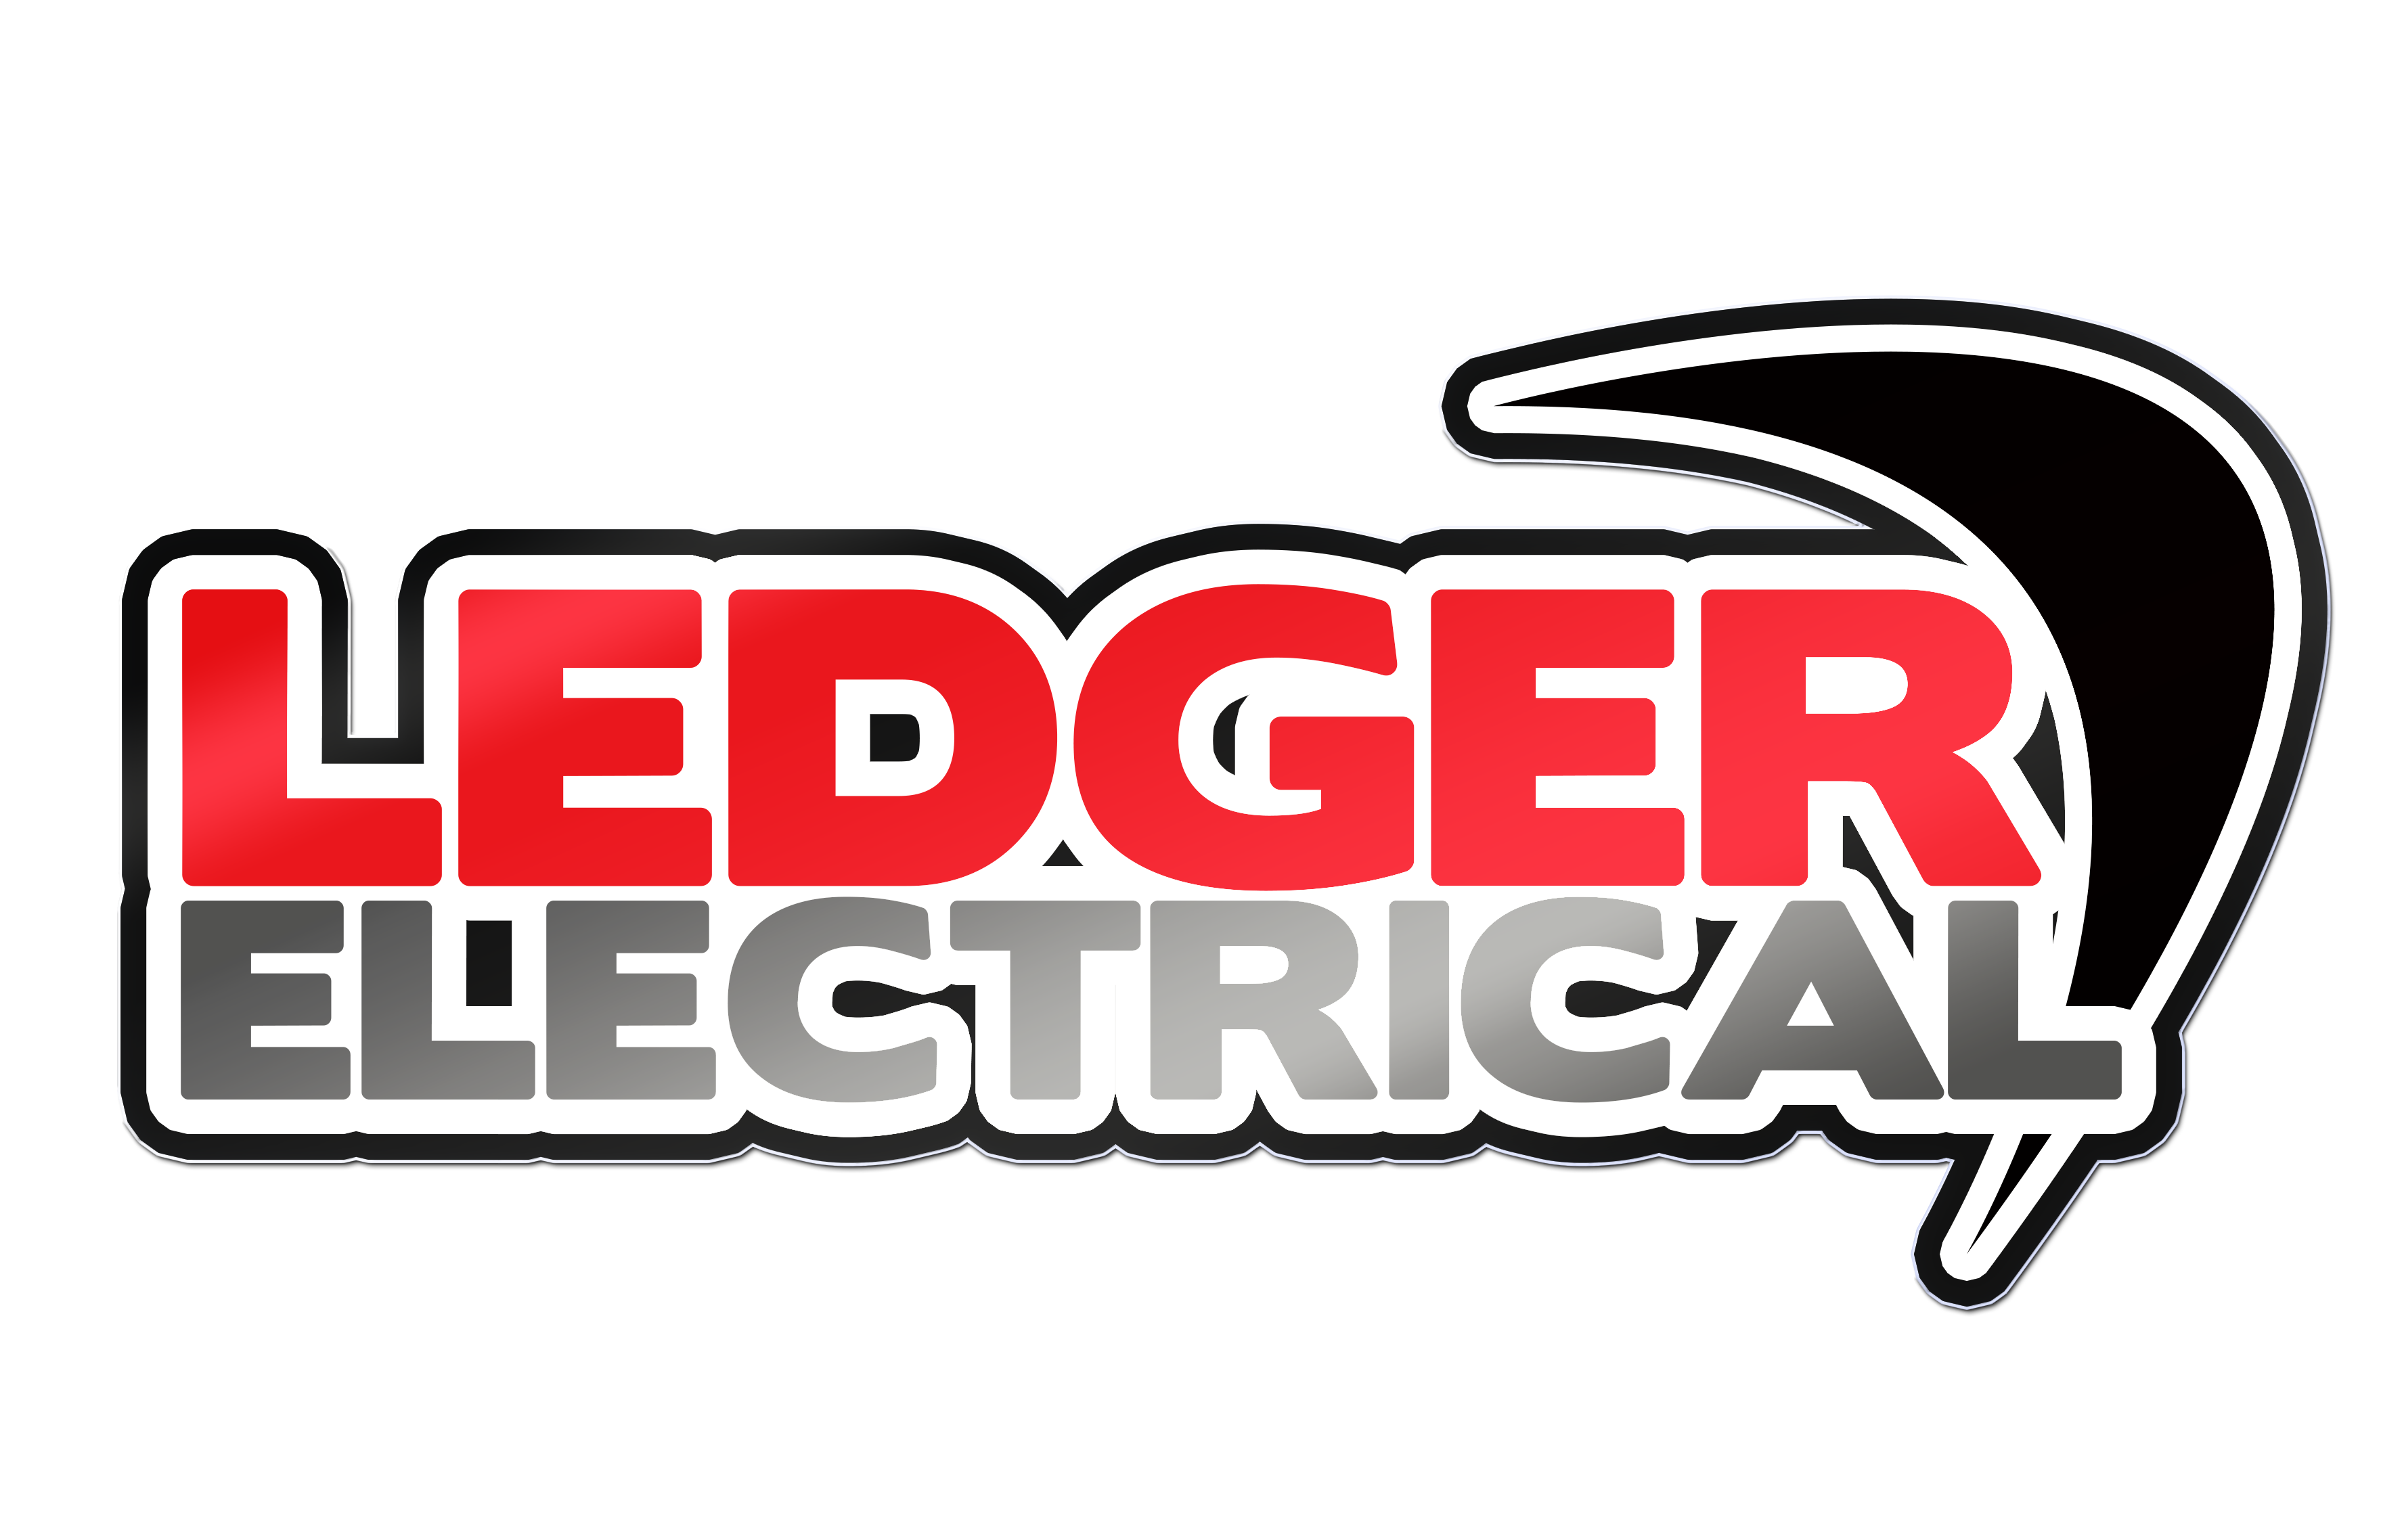 Ledger electrical are electricians and electrical contractors based in Barnsley, South Yorkshire. We offer a wide range of electrical services at competitive rates. Appliance installation, Cable management/containment, CCTV, Consumer units (fuse boards), Cooker hoods, Data wiring, Door entry systems, Door bells, Earthing and bonding, Electric cookers, Electrical fault finding, Electric heaters, Electric showers, Electrical repairs, Emergency lighting, Extractor fans, Fire alarm systems, Immersion heaters, Intruder alarms, Lighting, Maintenance, Motorised garage doors, New wiring, Replacement electrical accessories, Rewires, Smoke alarms, Socket outlets, Thermostats, TV mounting, Underfloor heating, Water heaters